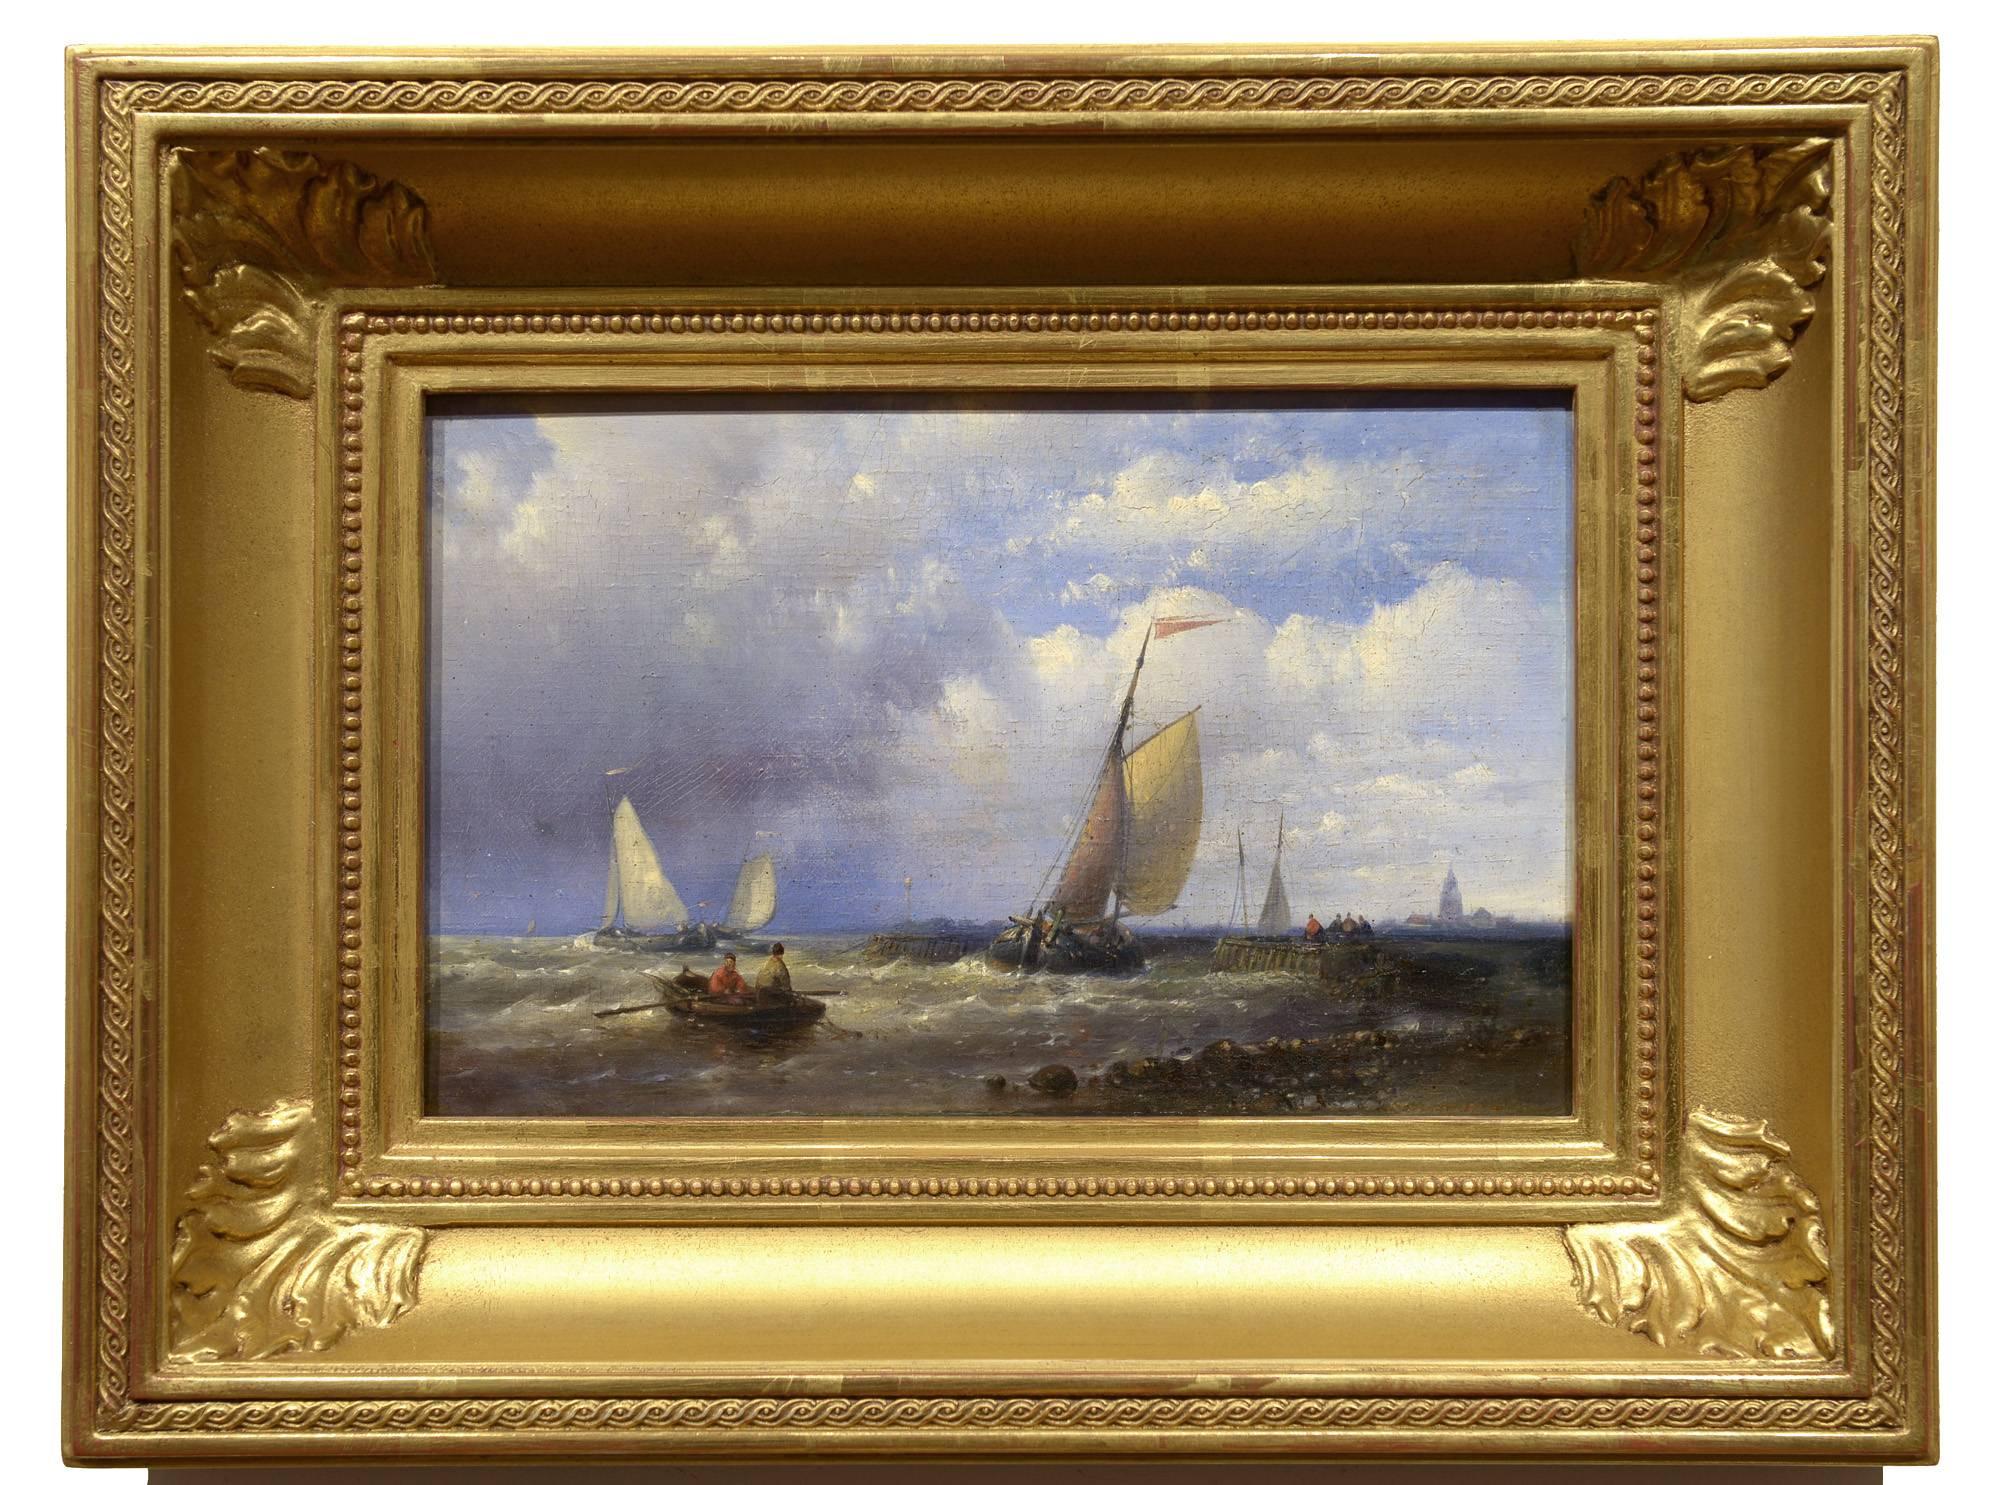 Shipping Off the Coast - Painting by Abraham Hulk the Elder